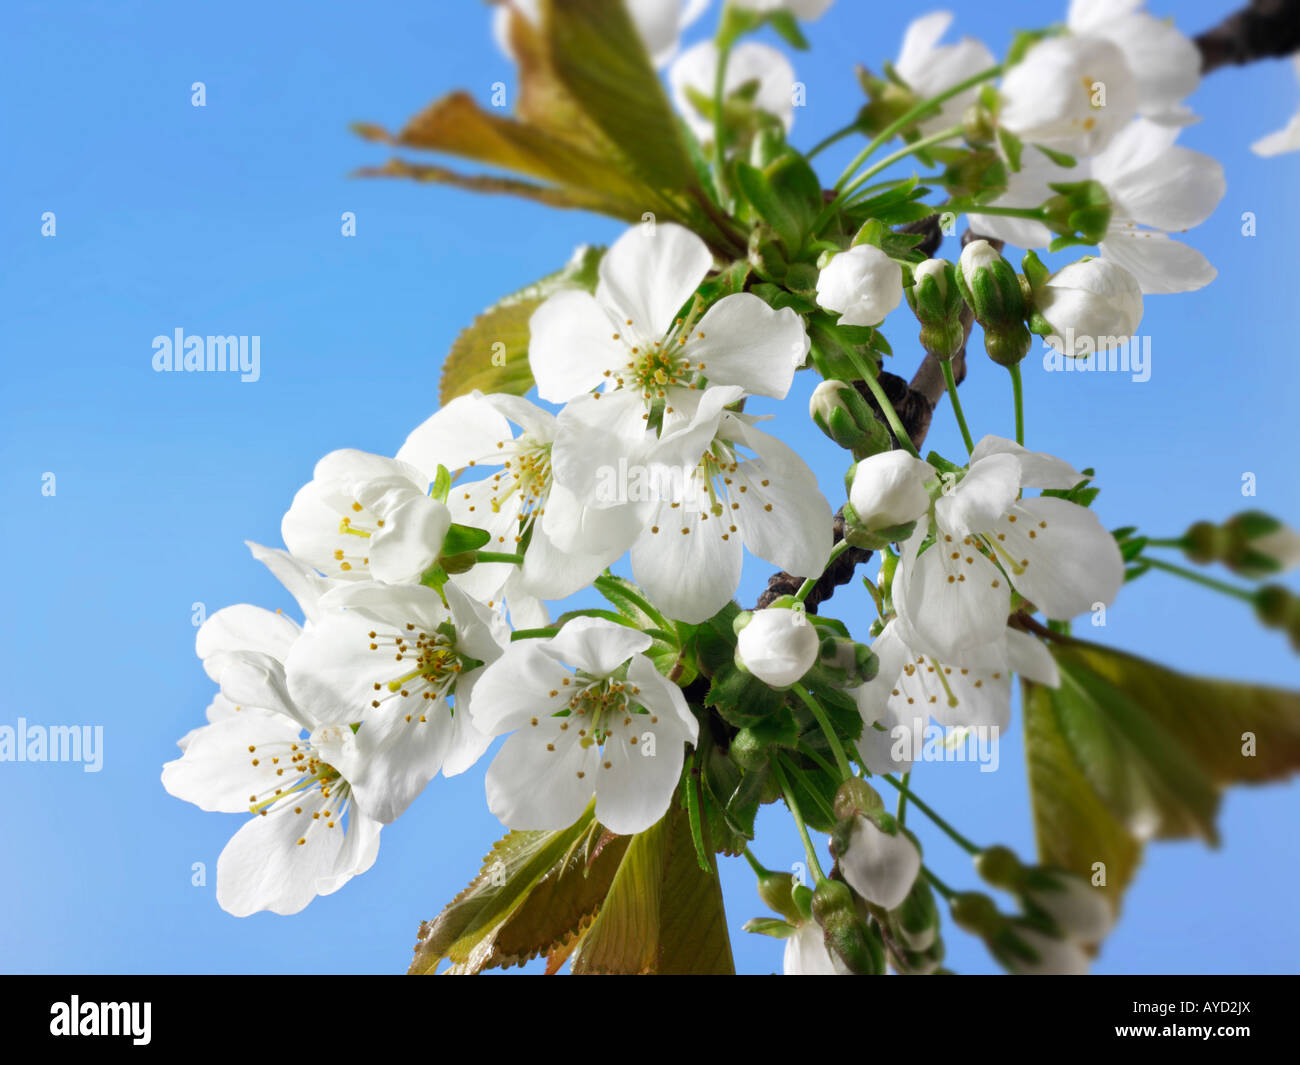 Pictures of fresh white cherry blossom, flowers and petals fresh picked from a cherry tree Stock Photo